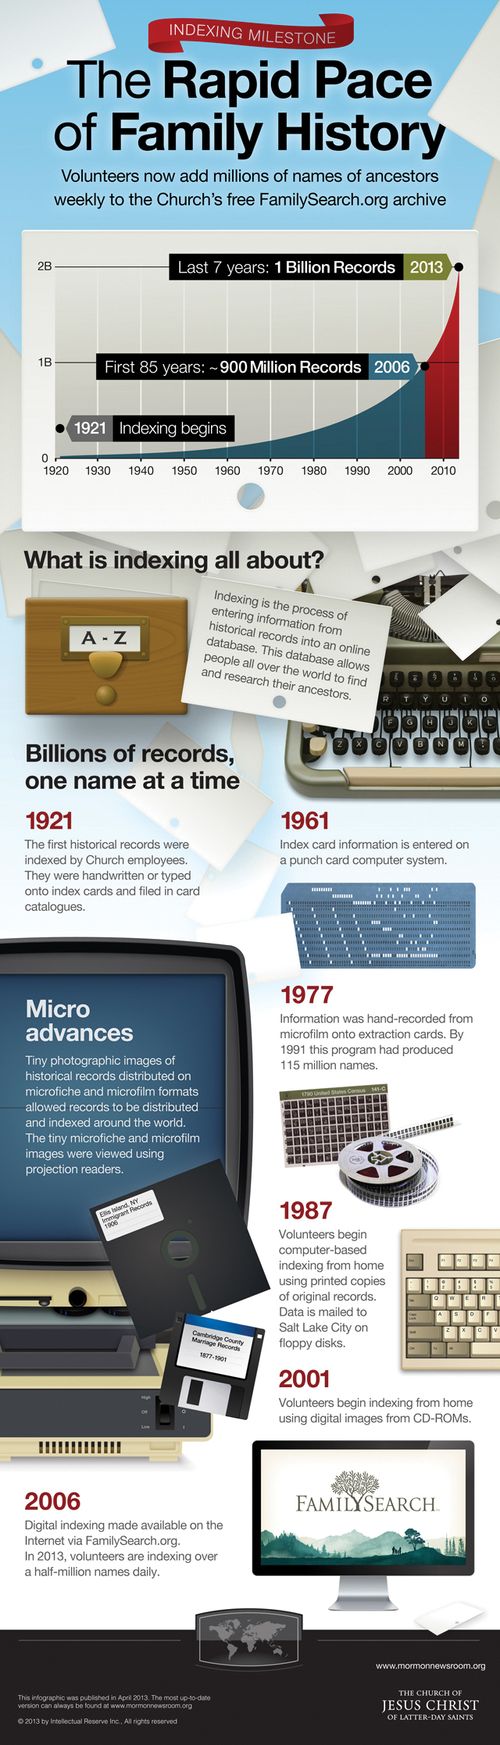 An infographic outlining the purpose of indexing and its progress from 1921 to now, with a graph and images showing the growth in technology used for indexing.